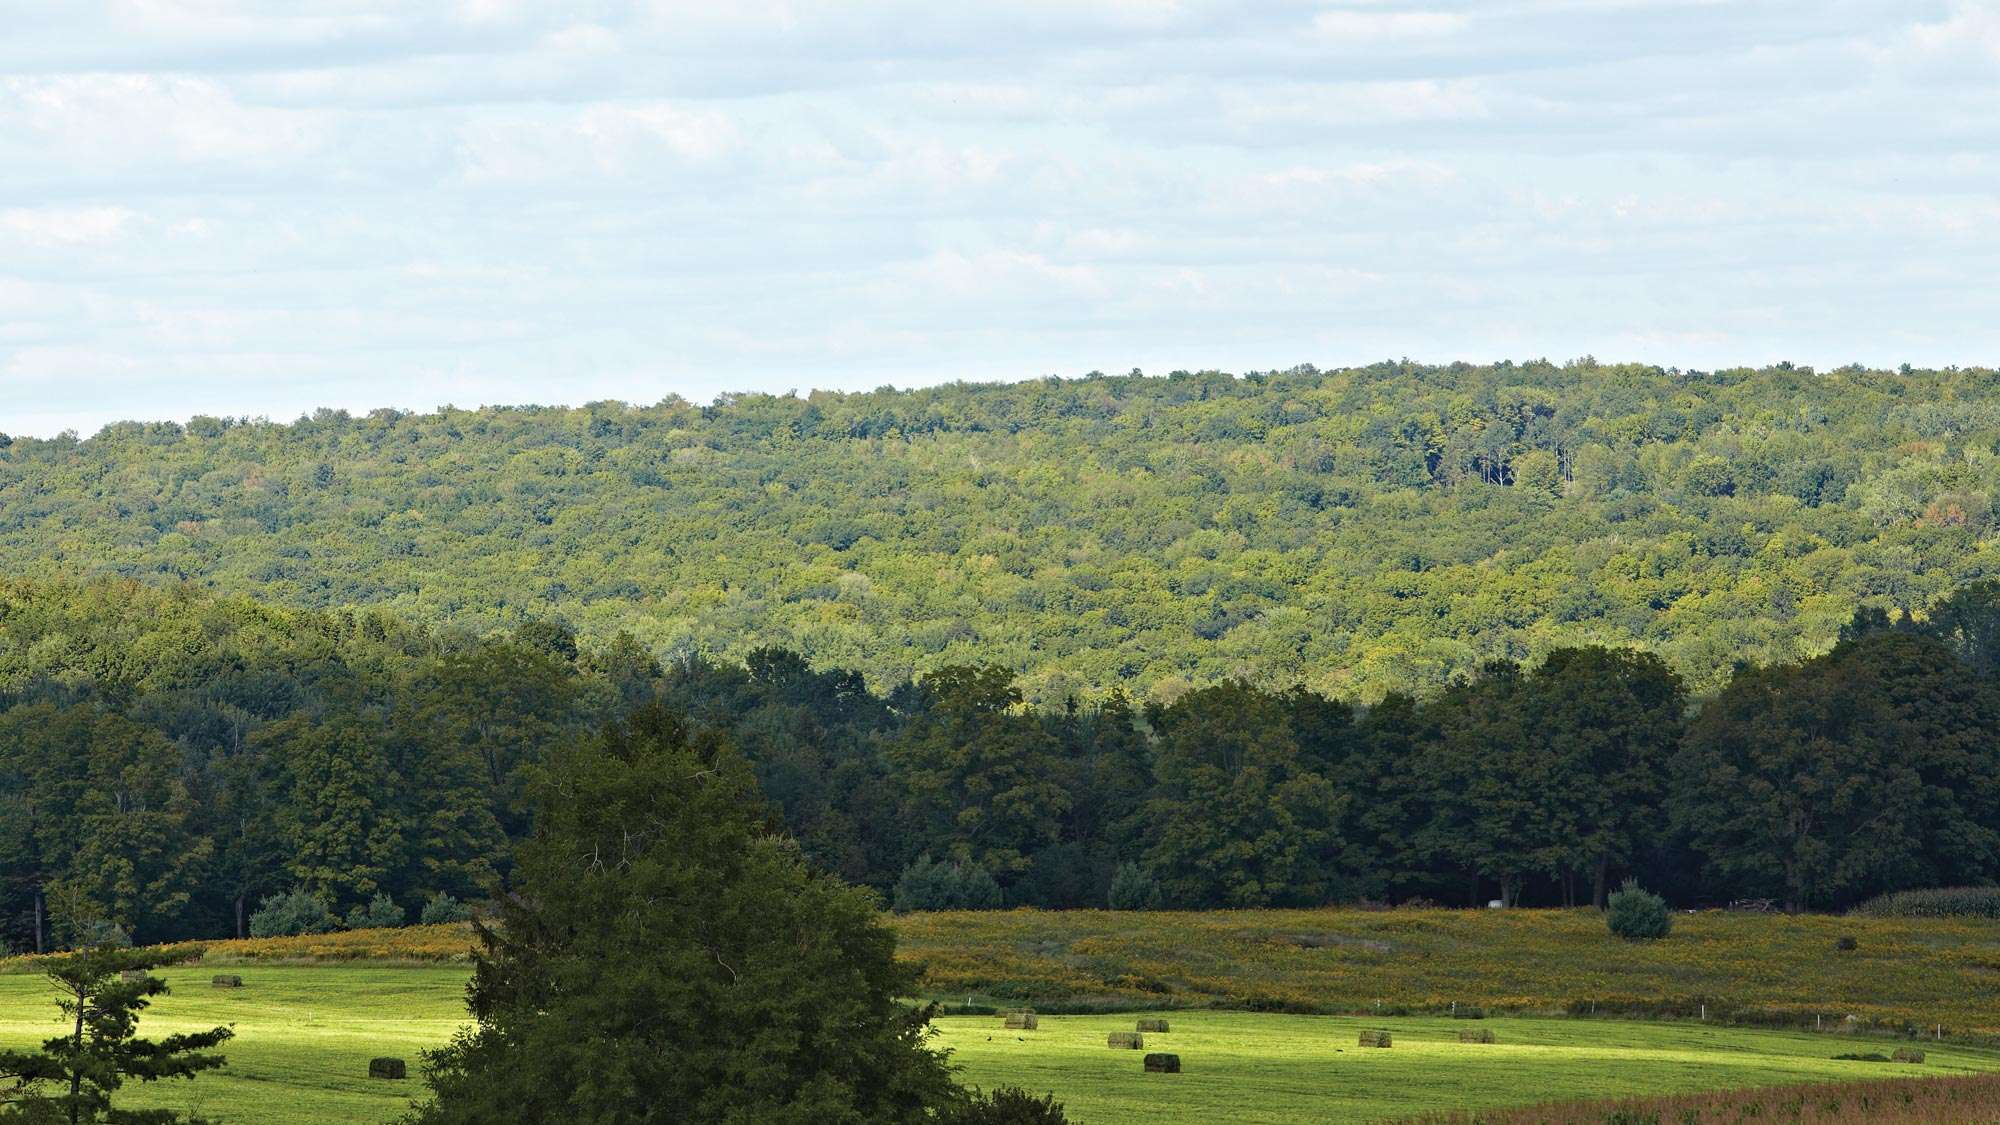 A distant landscape view overlooking the cropland and woodland areas of the farm at the Agriculture Center of Excellence